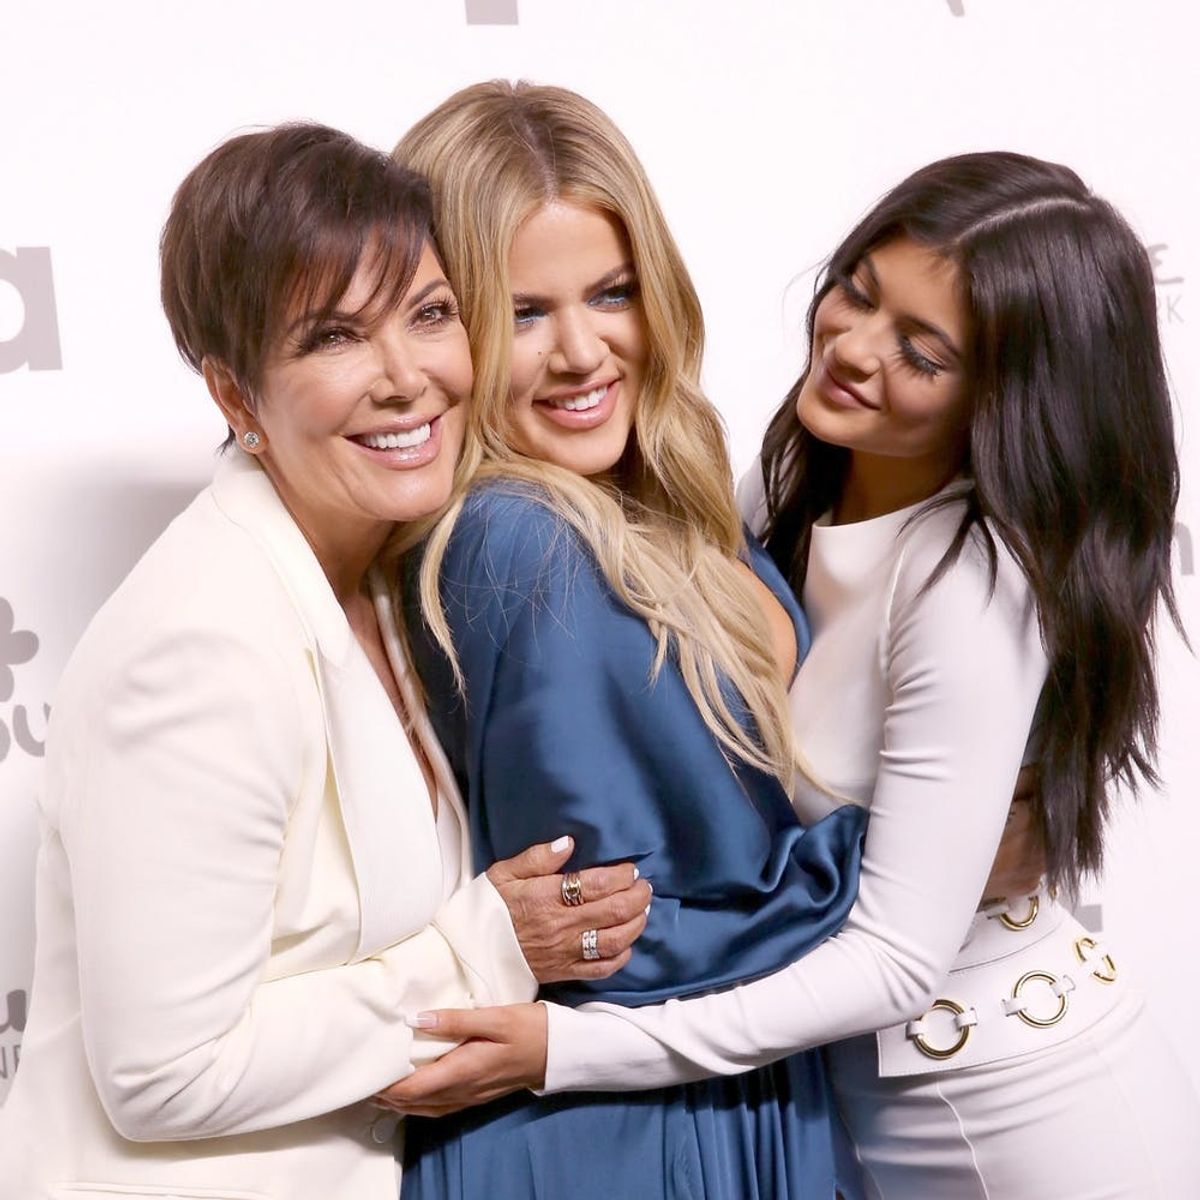 Kris Jenner Is “Over the Moon” About Khloé Kardashian’s Happy Life, “So Proud” of Kylie